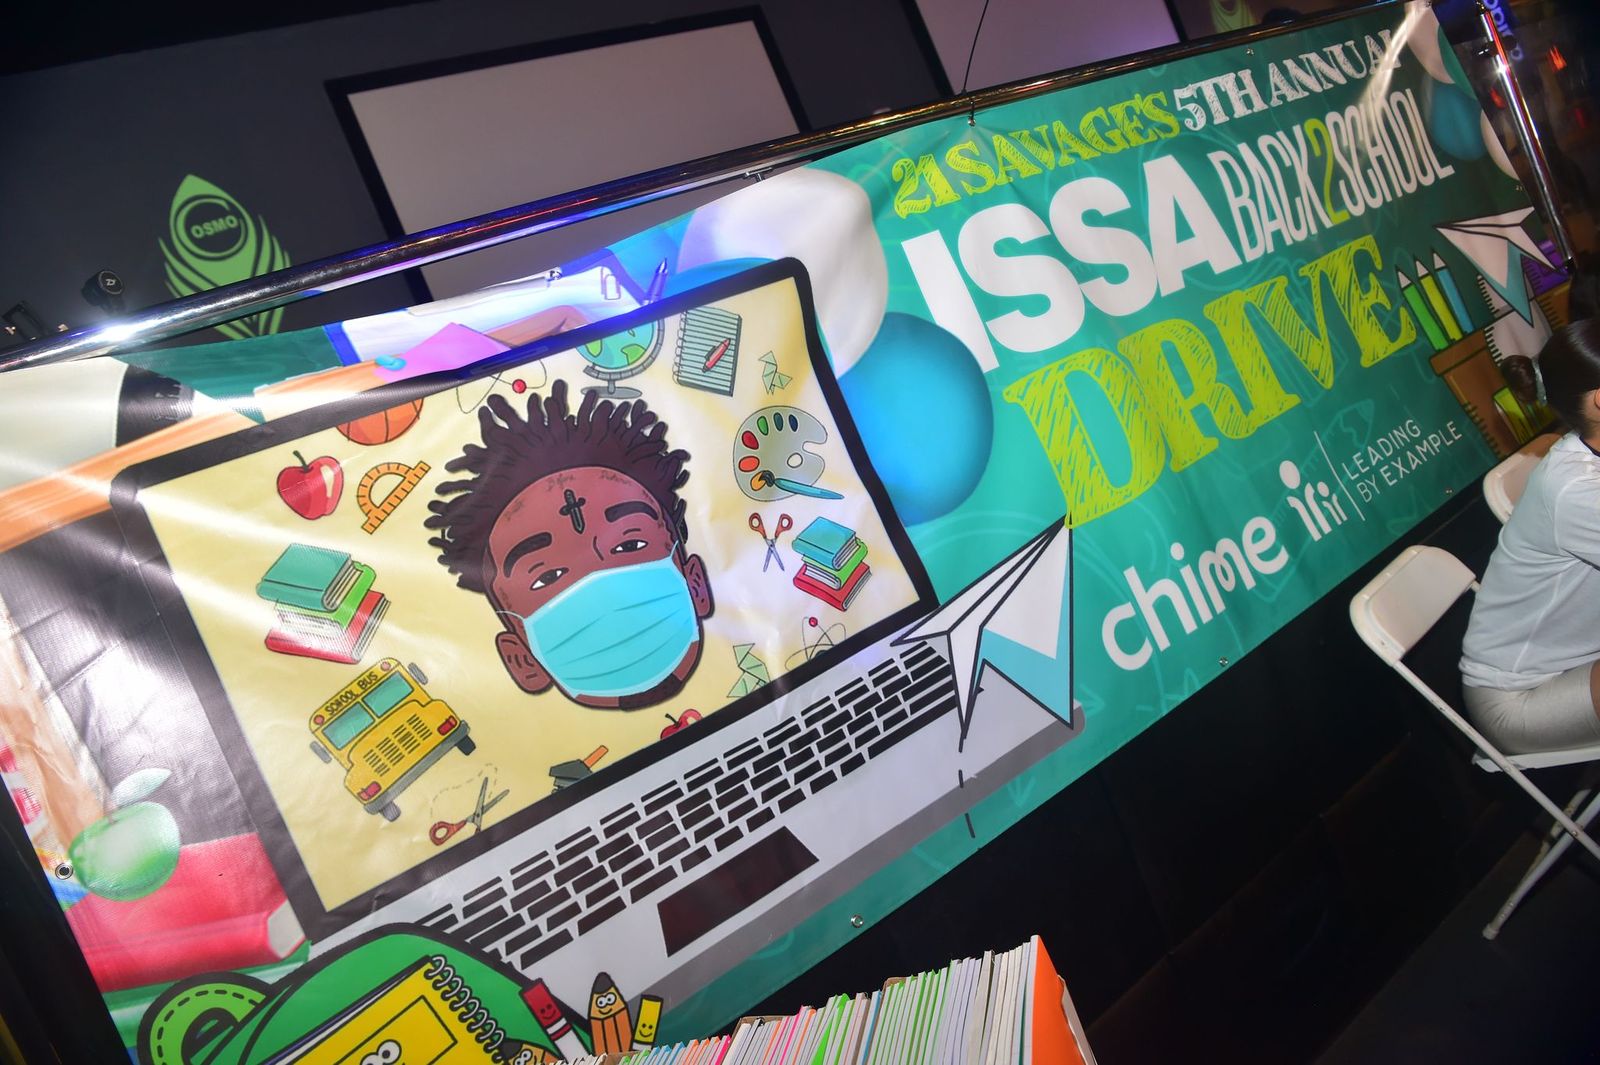 21 Savage Hosts COVID-19 Safe 5th Annual Issa Back to School Drive